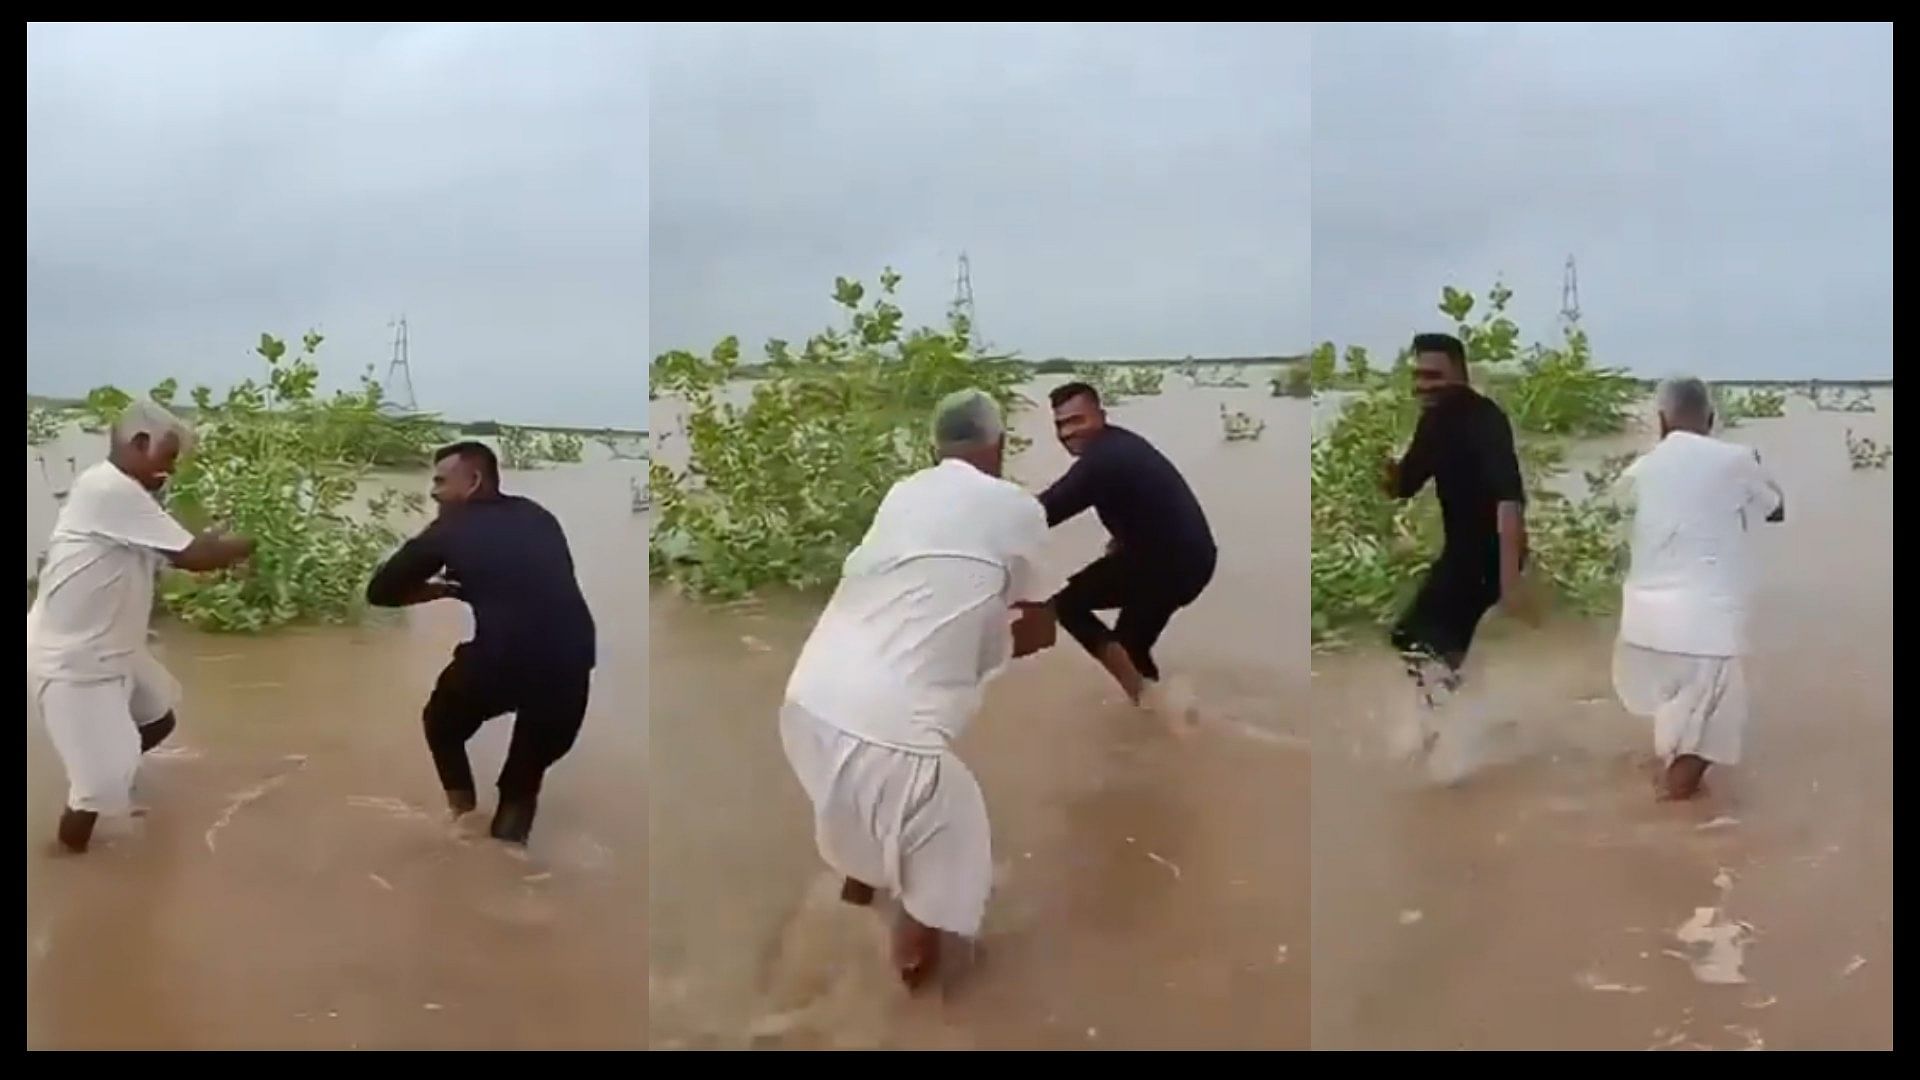 Father did amazing dance with son during rain video went viral on social media